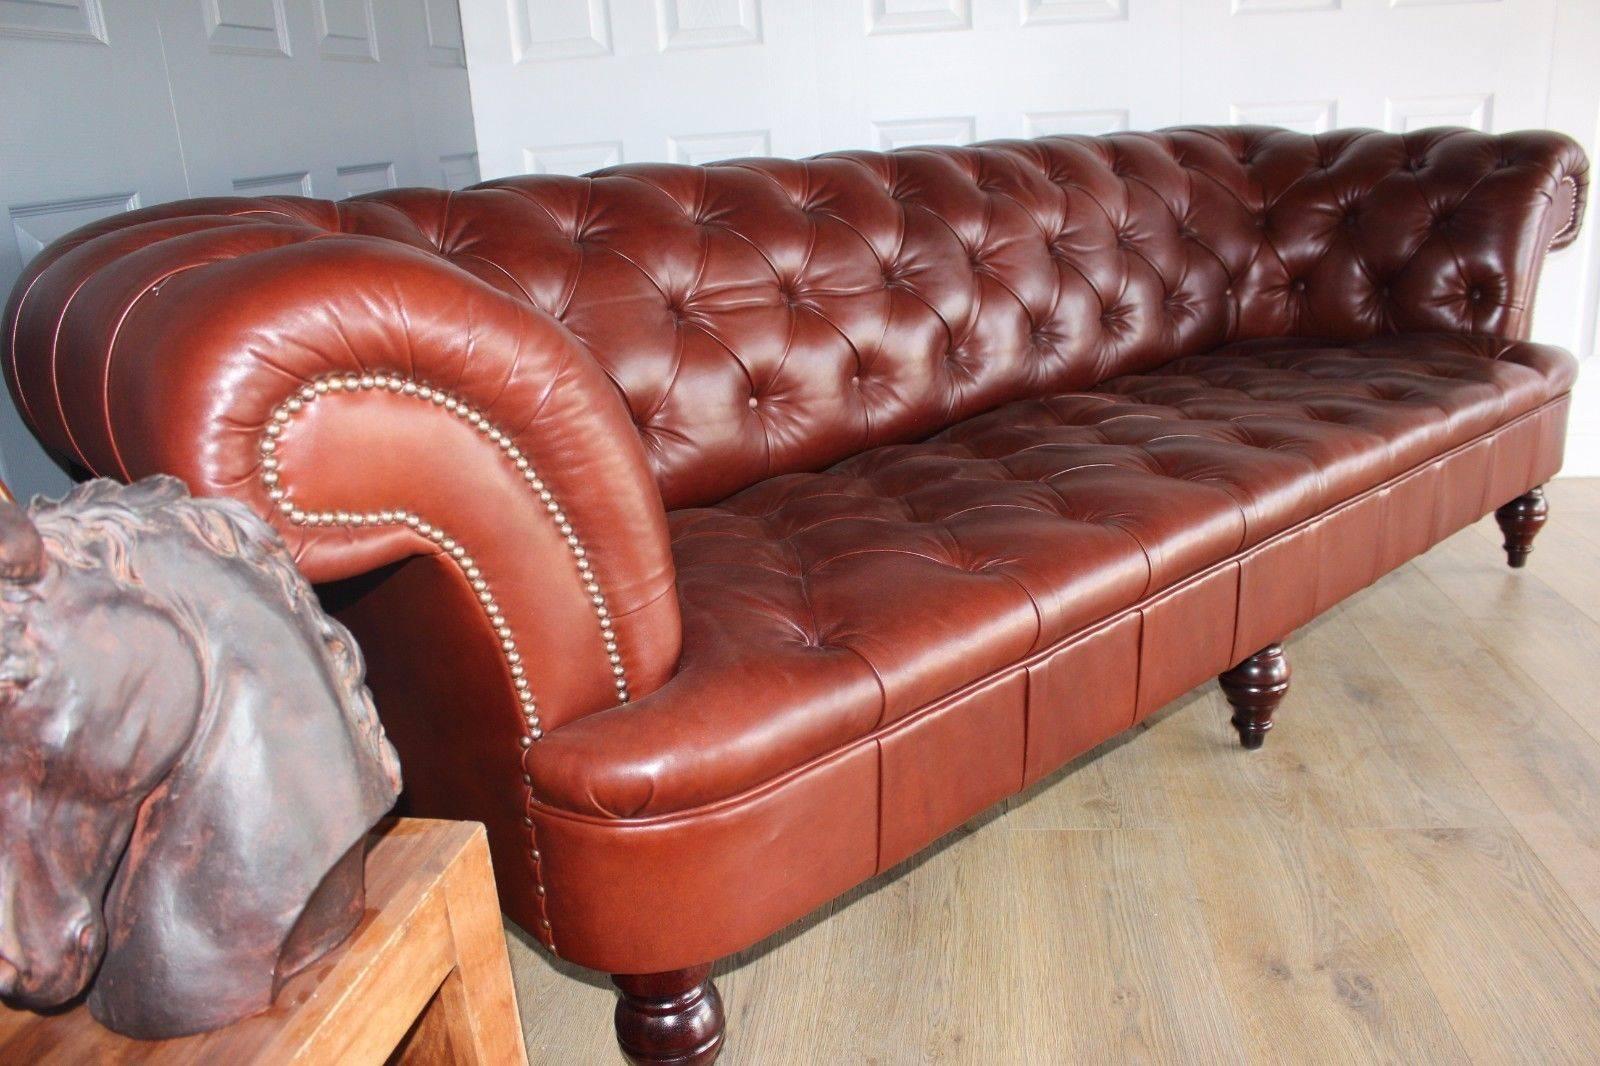 Genuine handmade designer George Smith Buttoned Chesterfield style leather sofa 
RRP £12000 new current model
high quality grade leather
sprung base
well cared for and in excellent condition
only one button slightly loose as can be seen from